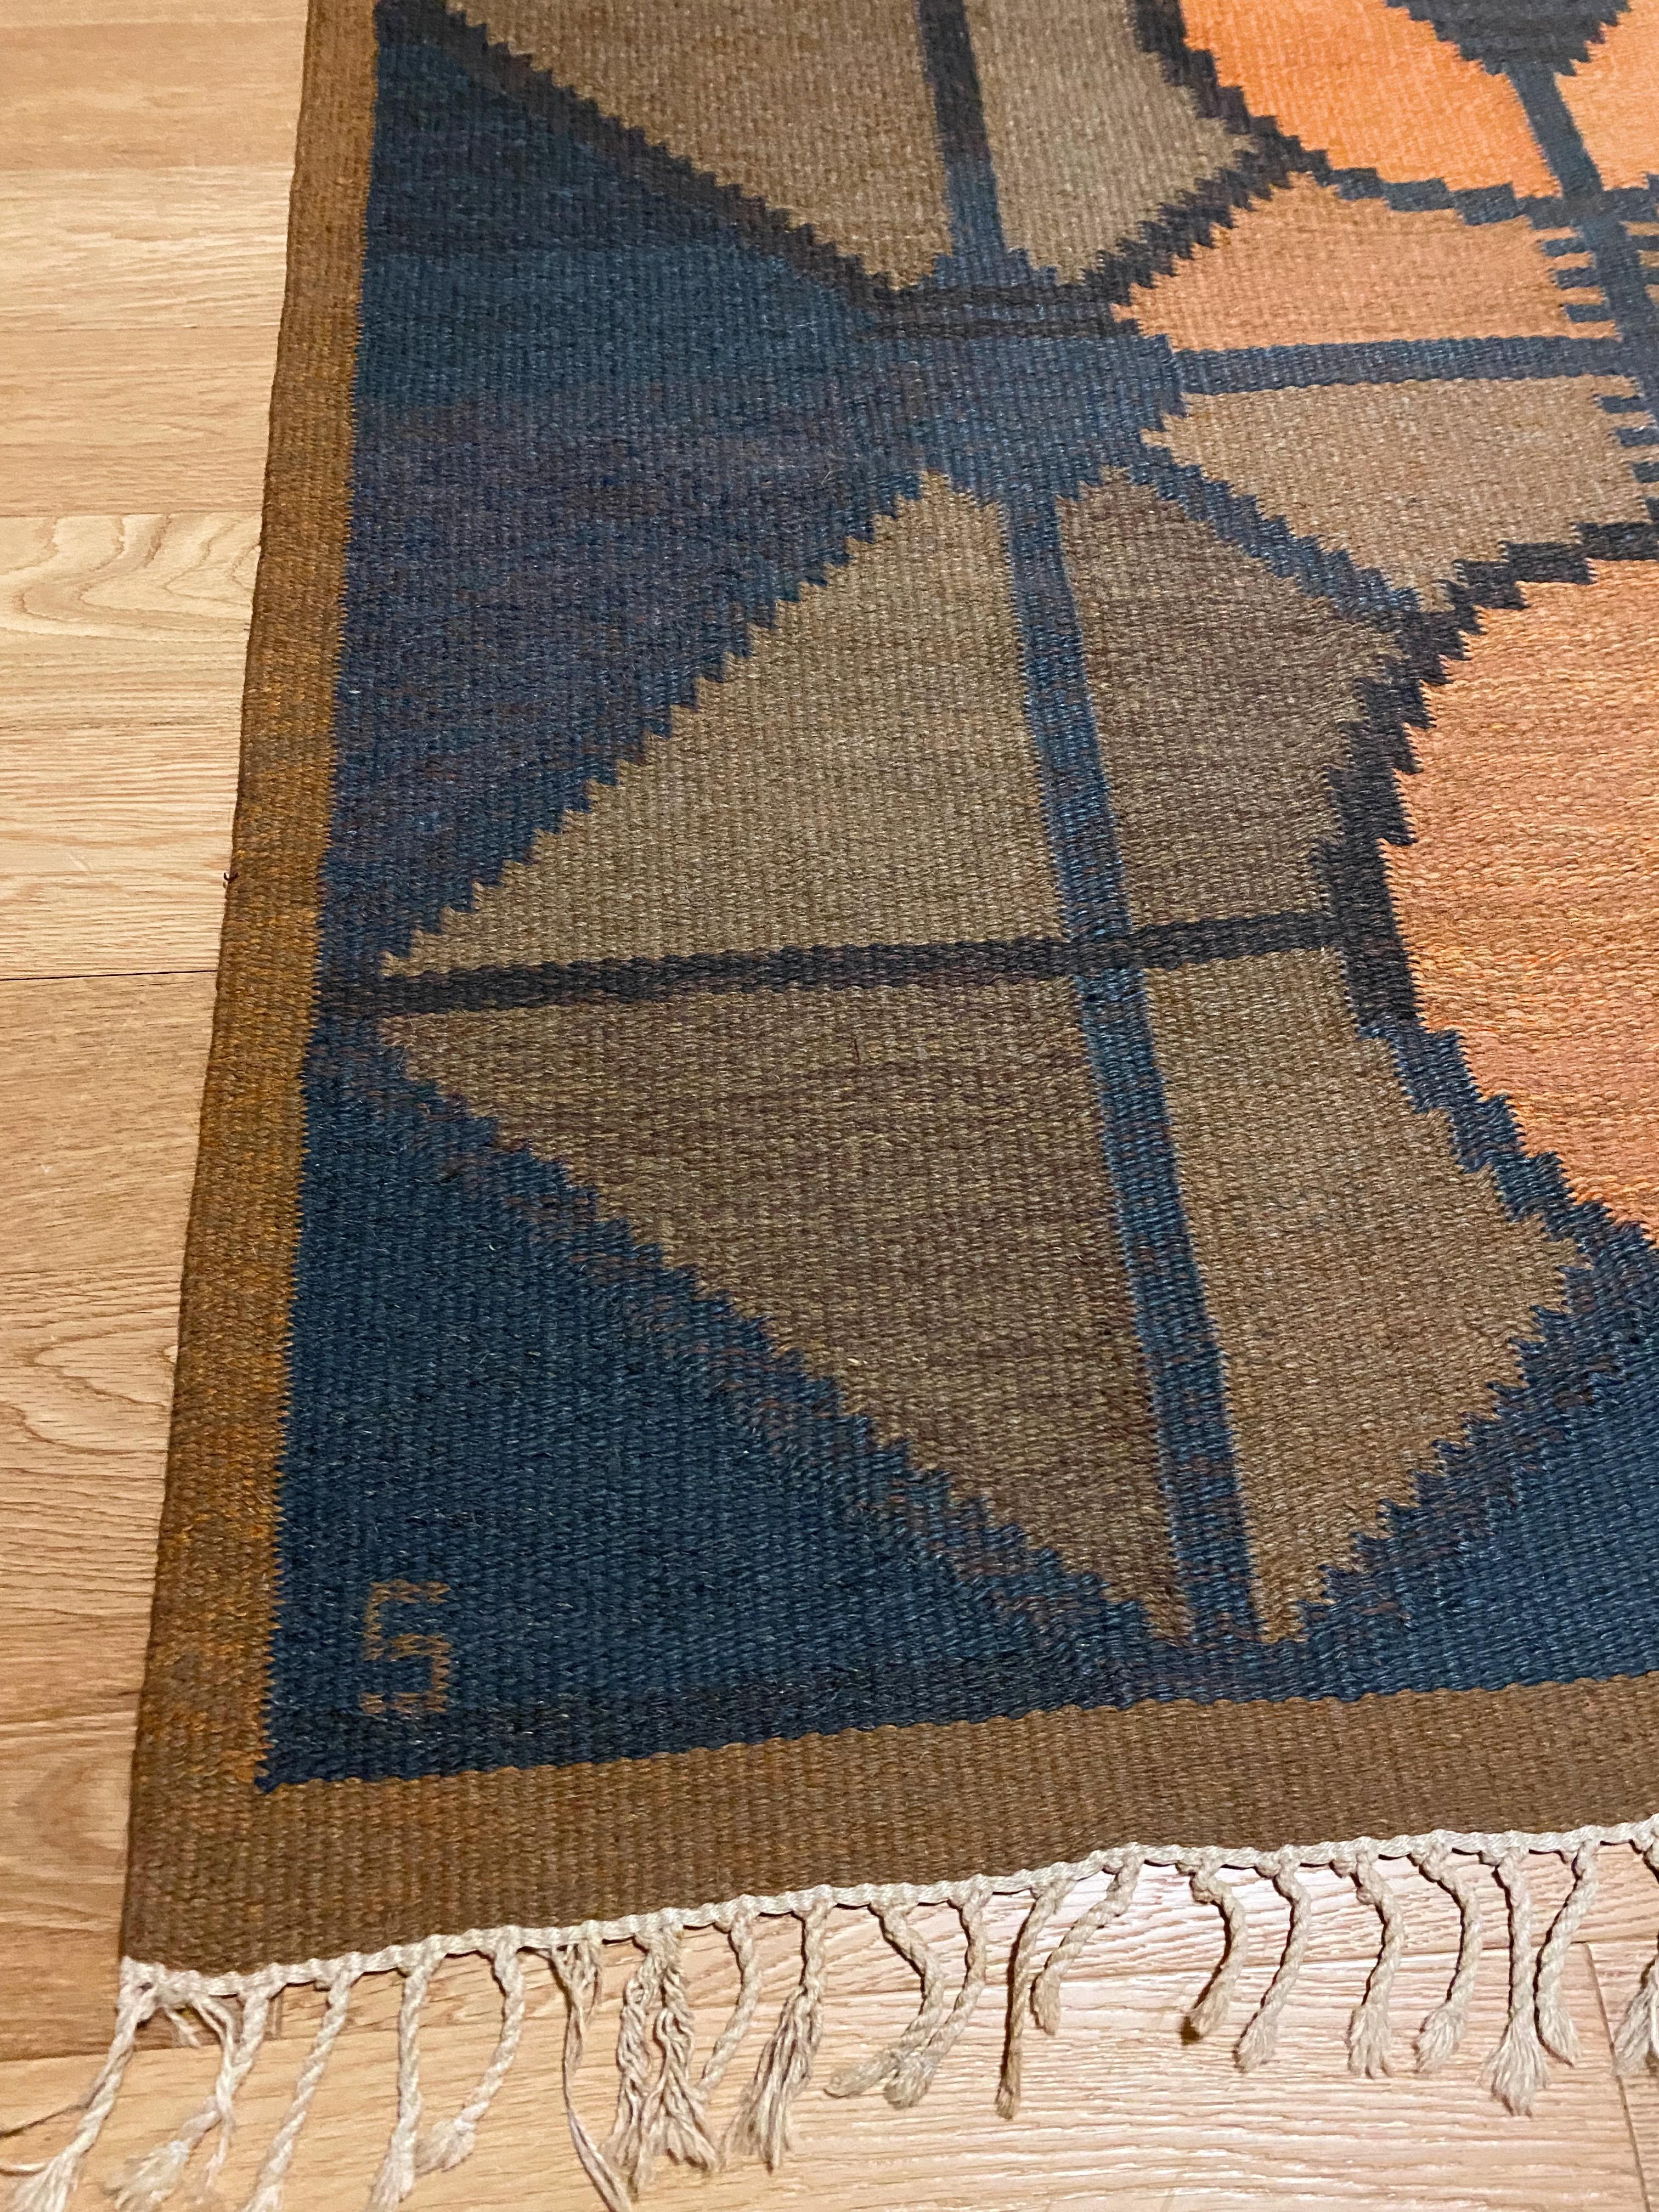 Beautiful Vintage Swedish Kilim rug by Brita Svefors. Geomatric shapes in burnt orange, blue and brown shades creates a stunning design. Age appropriate wear with teared fringes and small repairs. But overall nothing that impacts the great design of